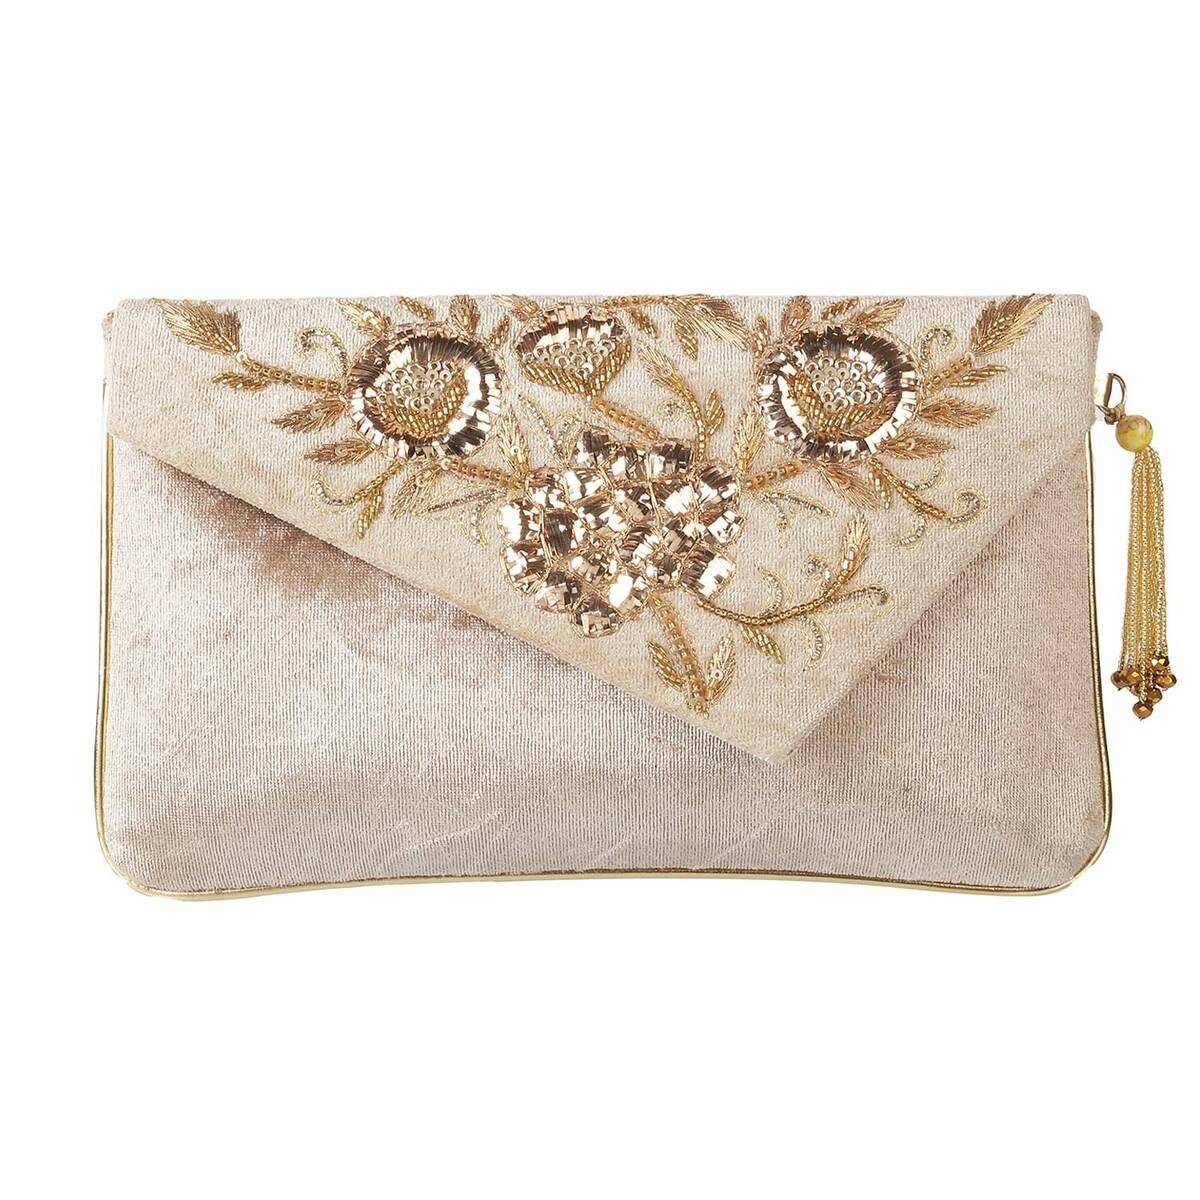 Buy Spring Velvet Gold Clutch Purse, Bag With Designer Pattern, Leaf  Embroidery and Aesthetic Sequin for Wedding and Ethnic Wear. Online in India  - Etsy